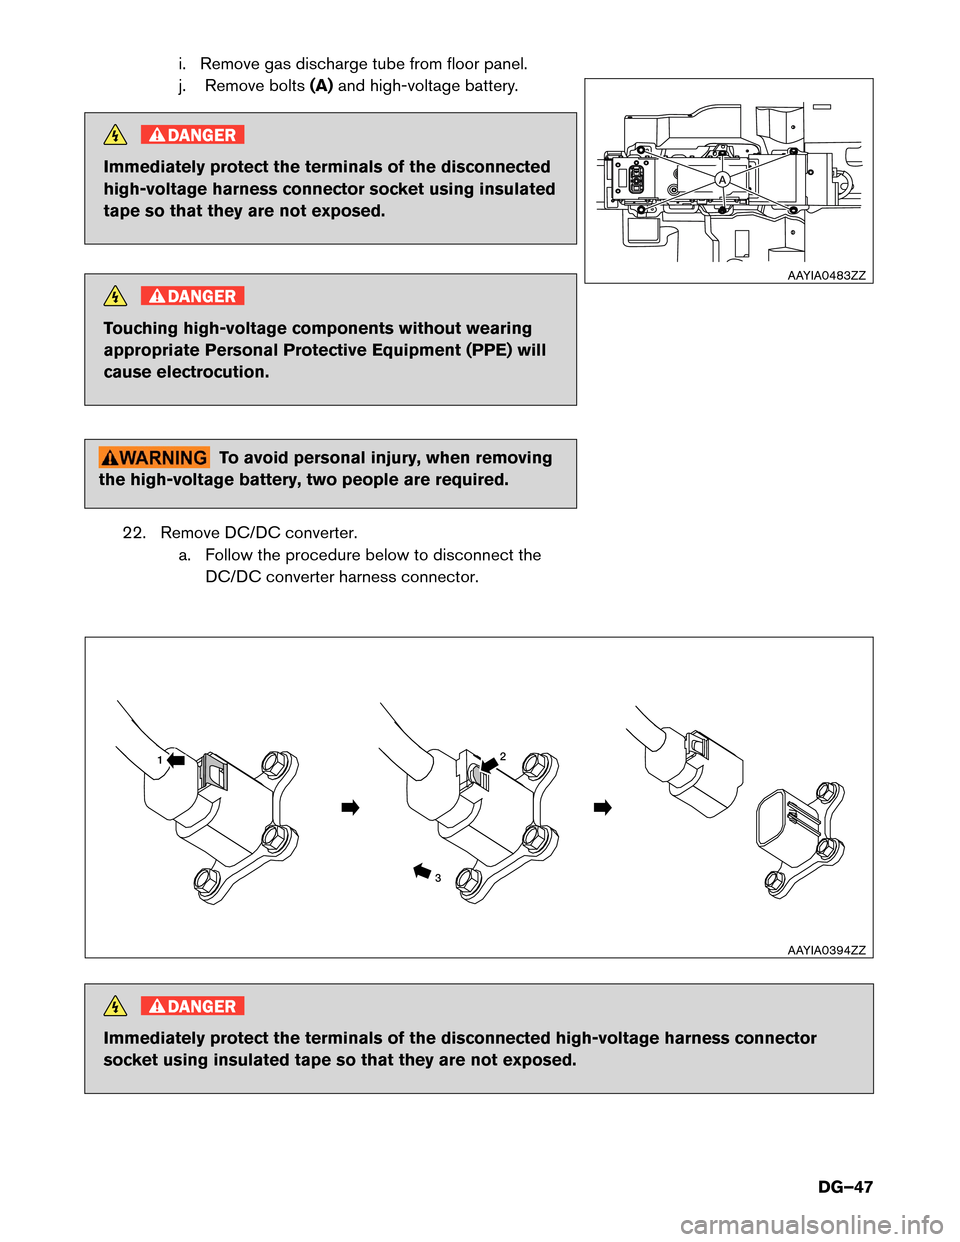 NISSAN MURANO HYBRID 2016 3.G Dismantling Guide i. Remove gas discharge tube from floor panel.
j.
Remove bolts (A)and high-voltage battery. DANGER
Immediately protect the terminals of the disconnected
high-voltage

harness connector socket using in